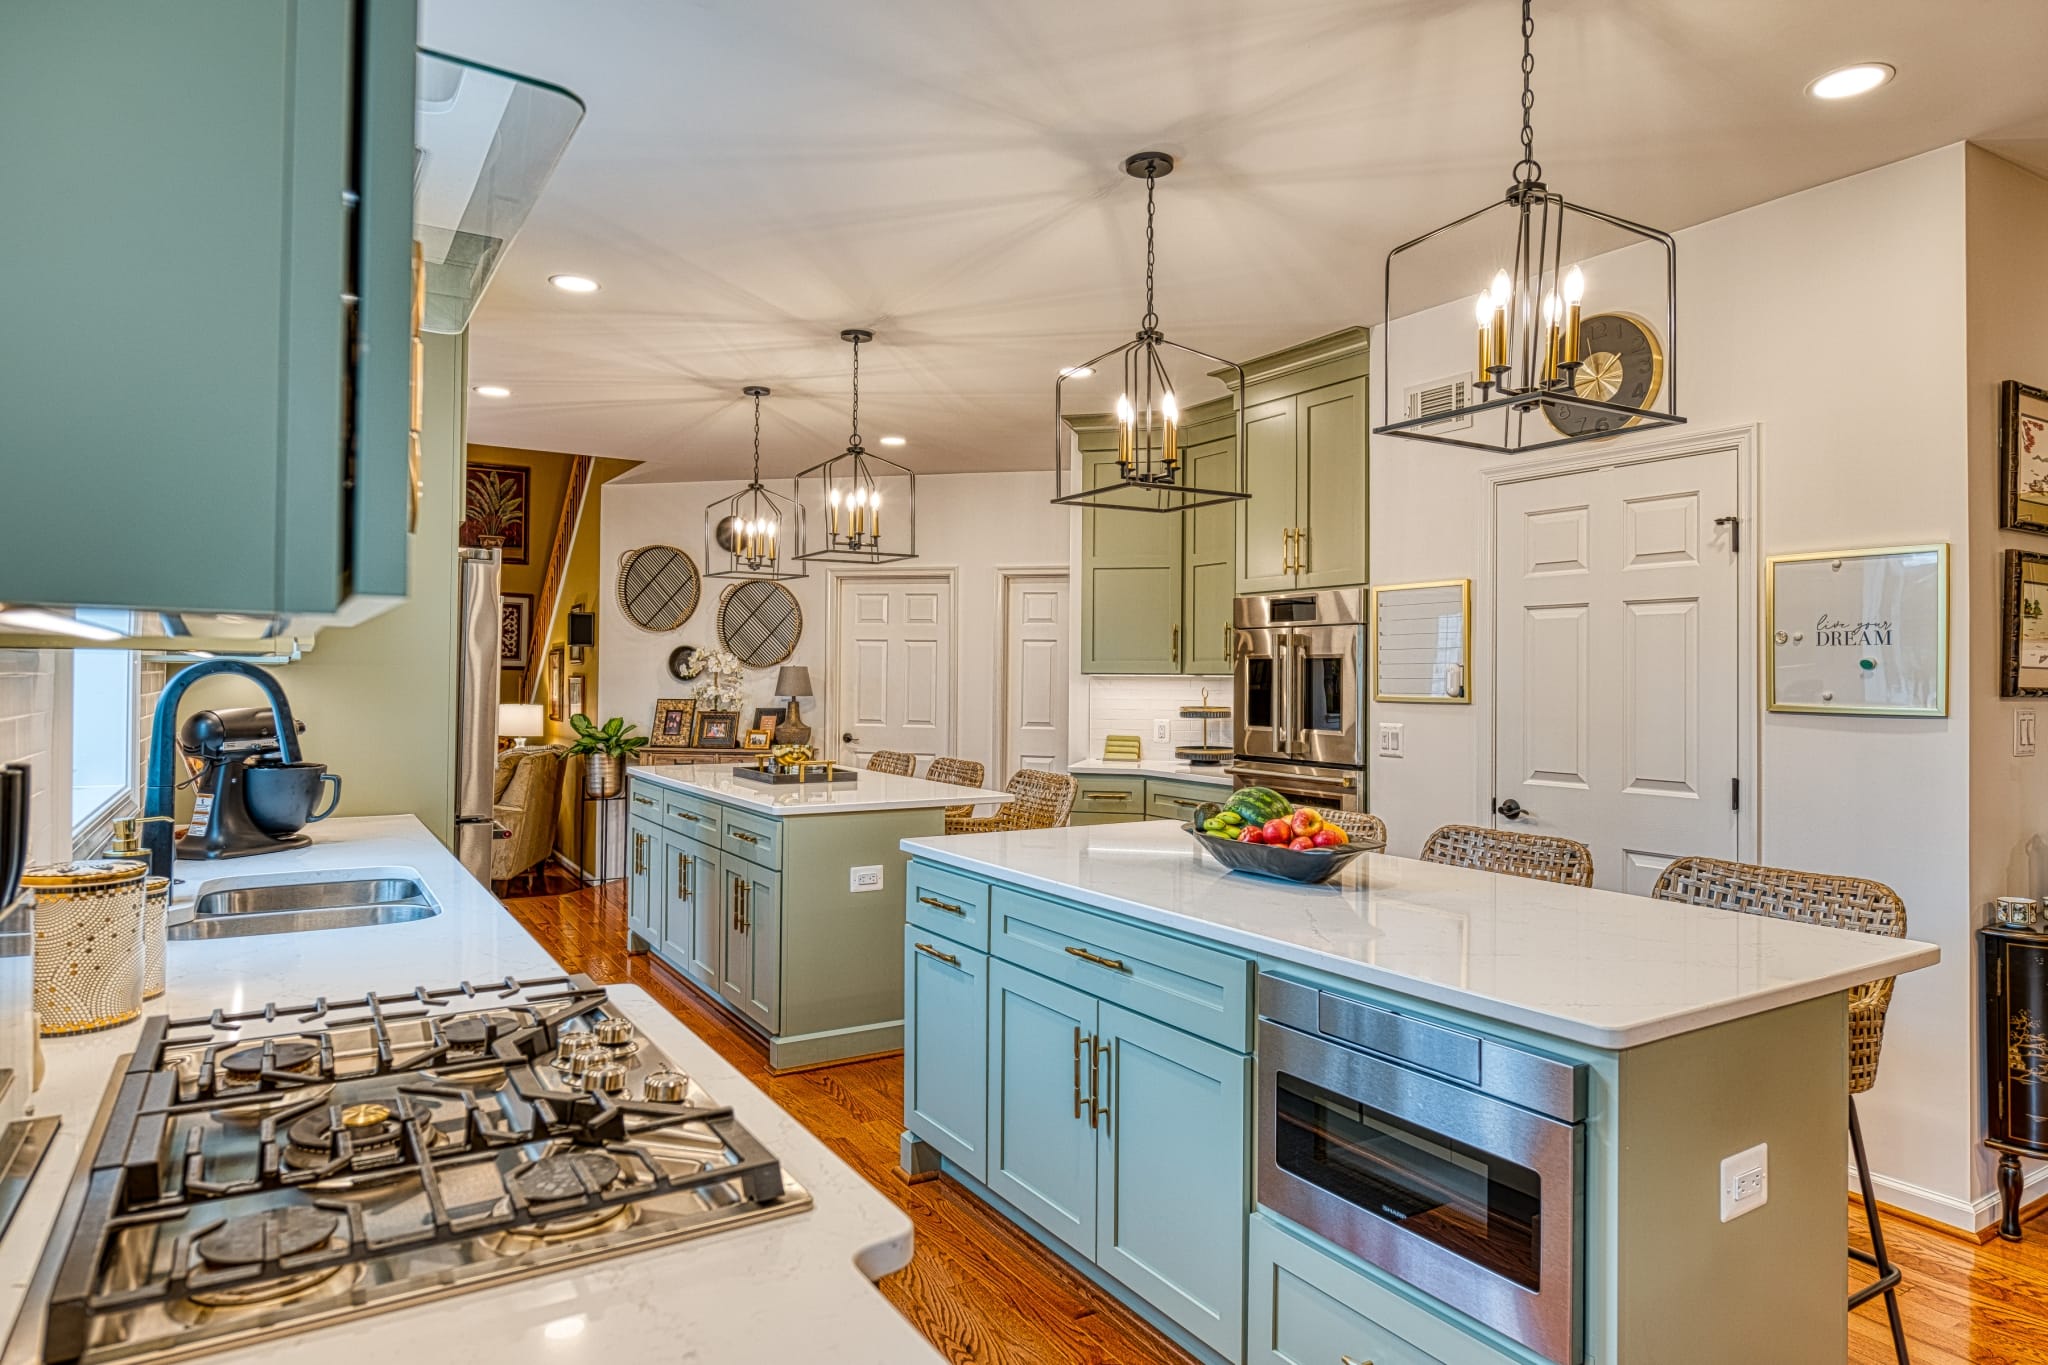 Gaiesville Kitchen Remodel with double islands